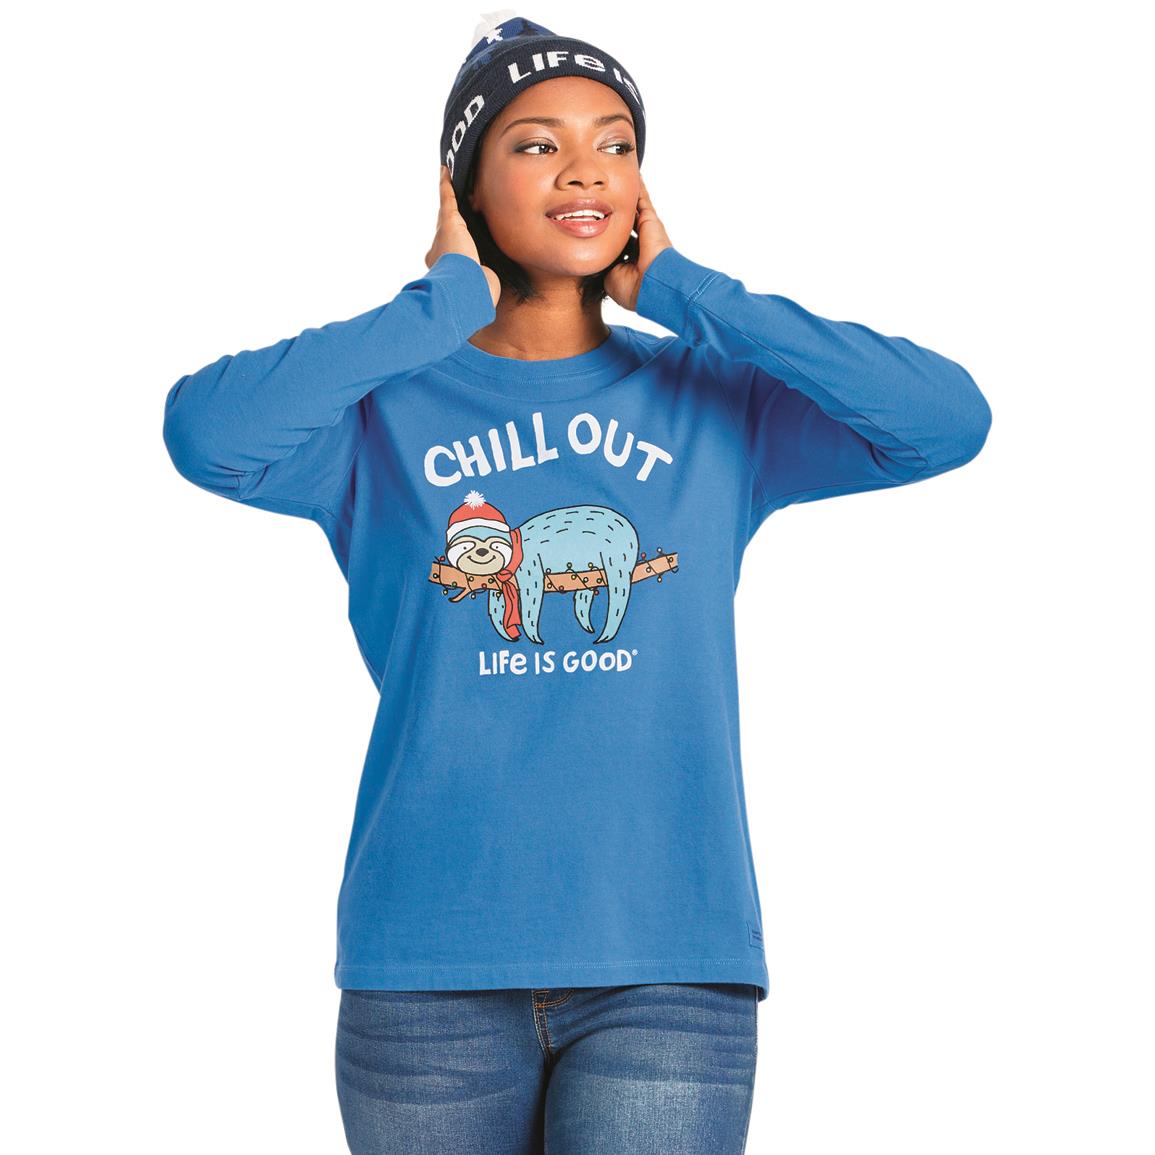 Life is Good Women's Holiday Chill Out Crusher Shirt, Royal Blue